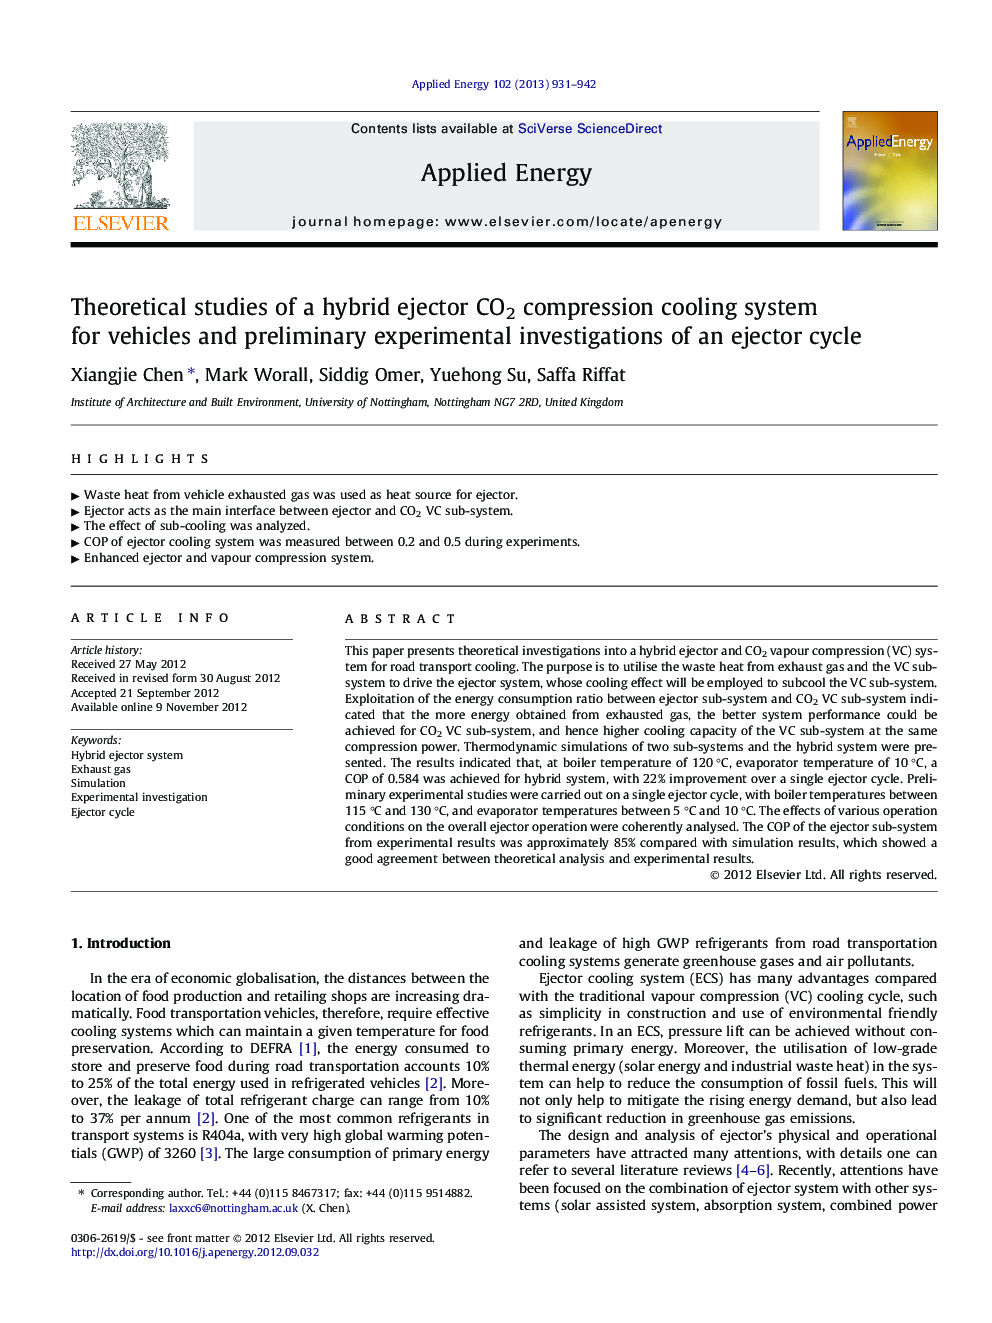 Theoretical studies of a hybrid ejector CO2 compression cooling system for vehicles and preliminary experimental investigations of an ejector cycle